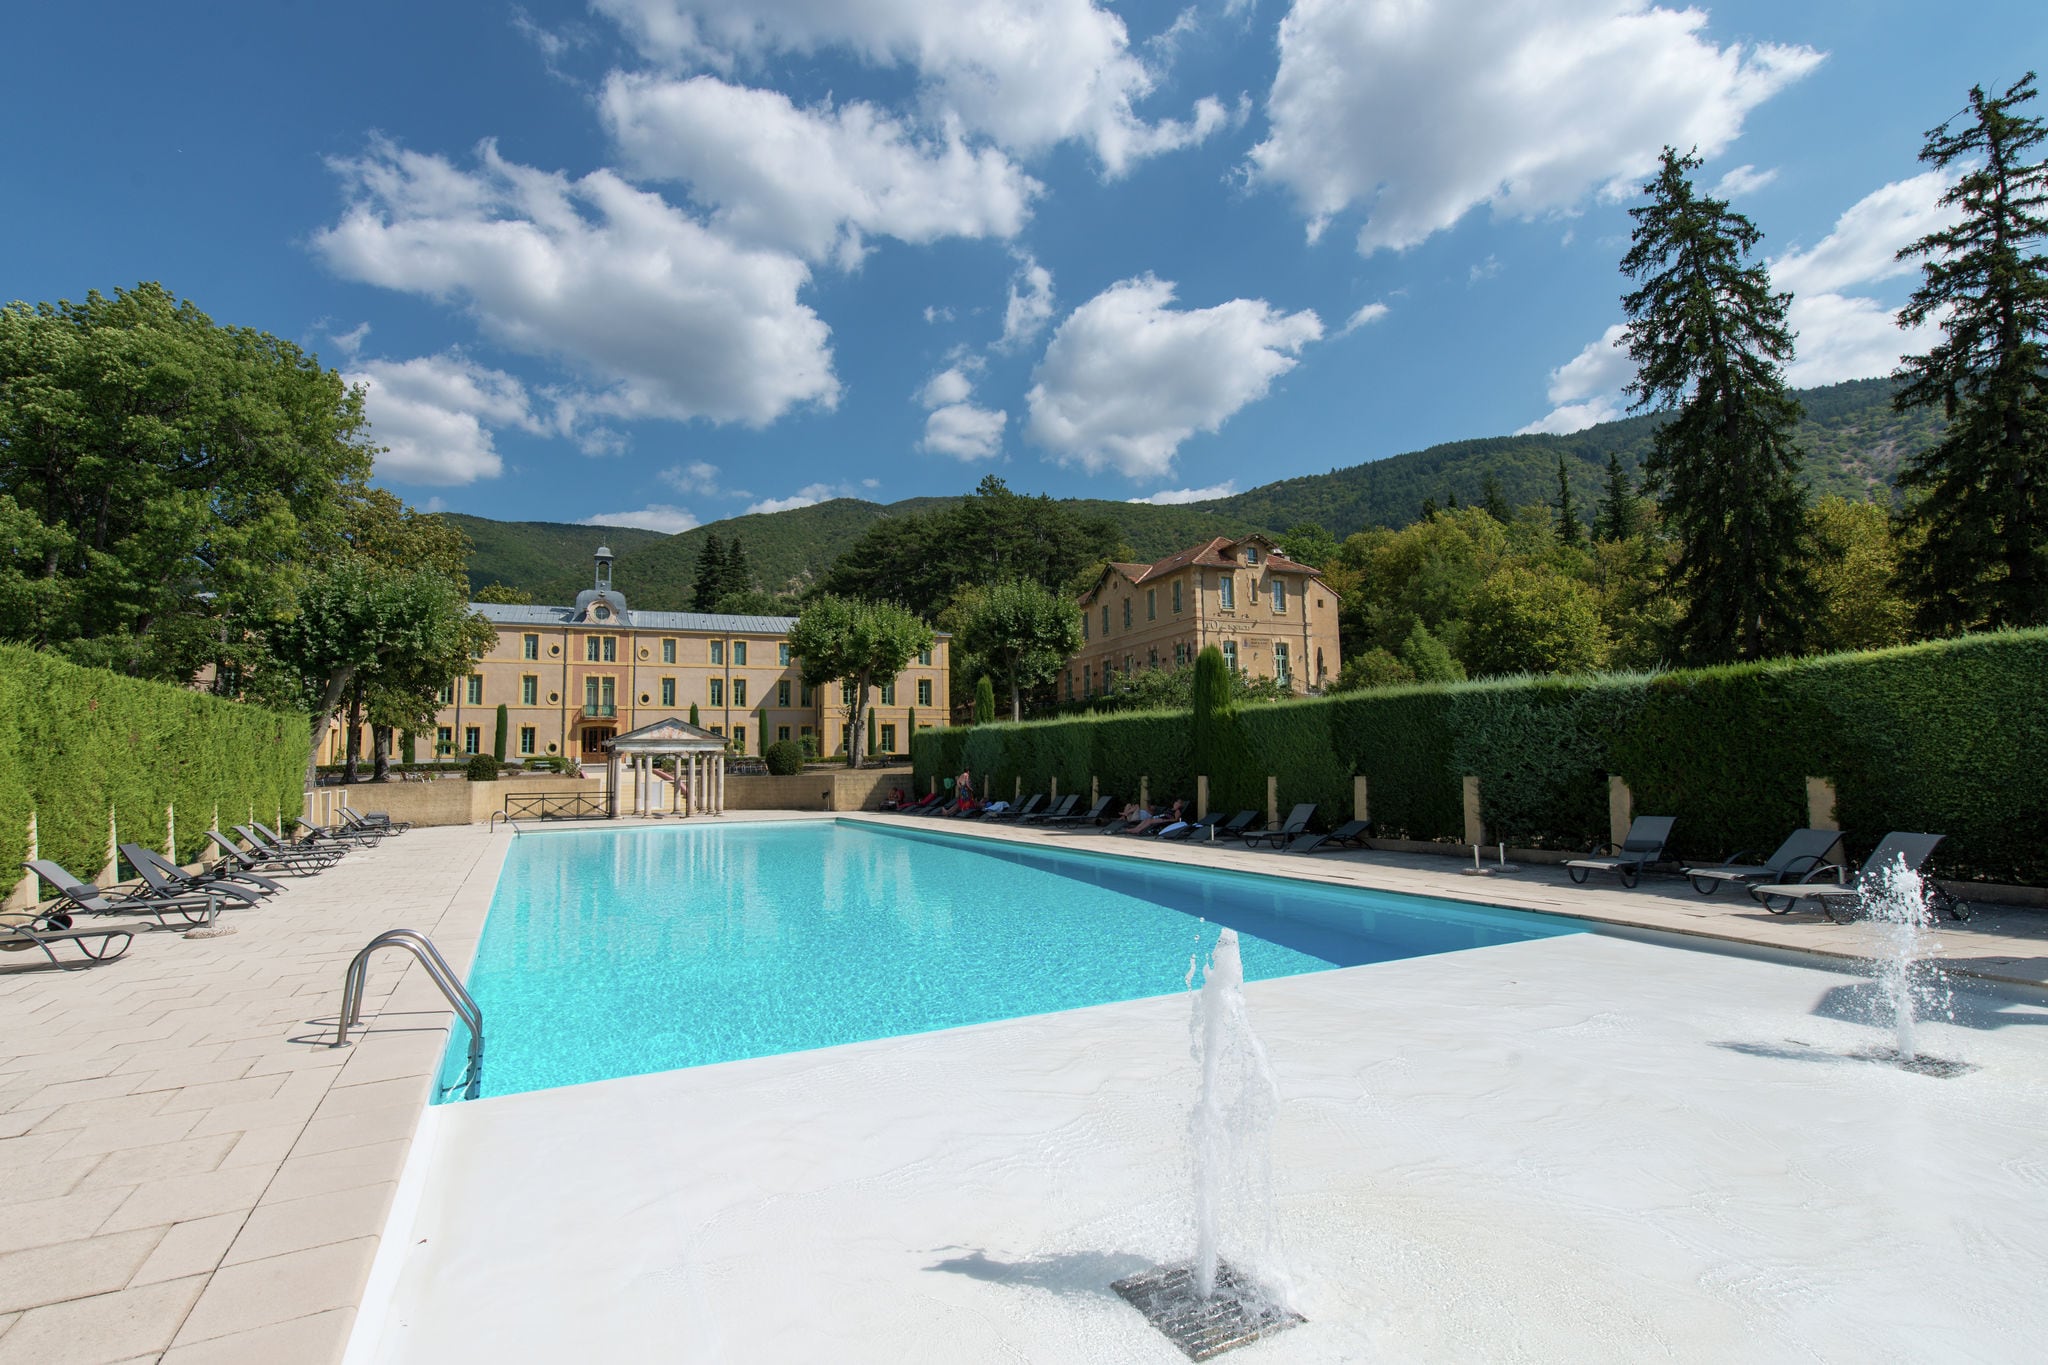 Historical castle in Montbrun-les-Bains with pool